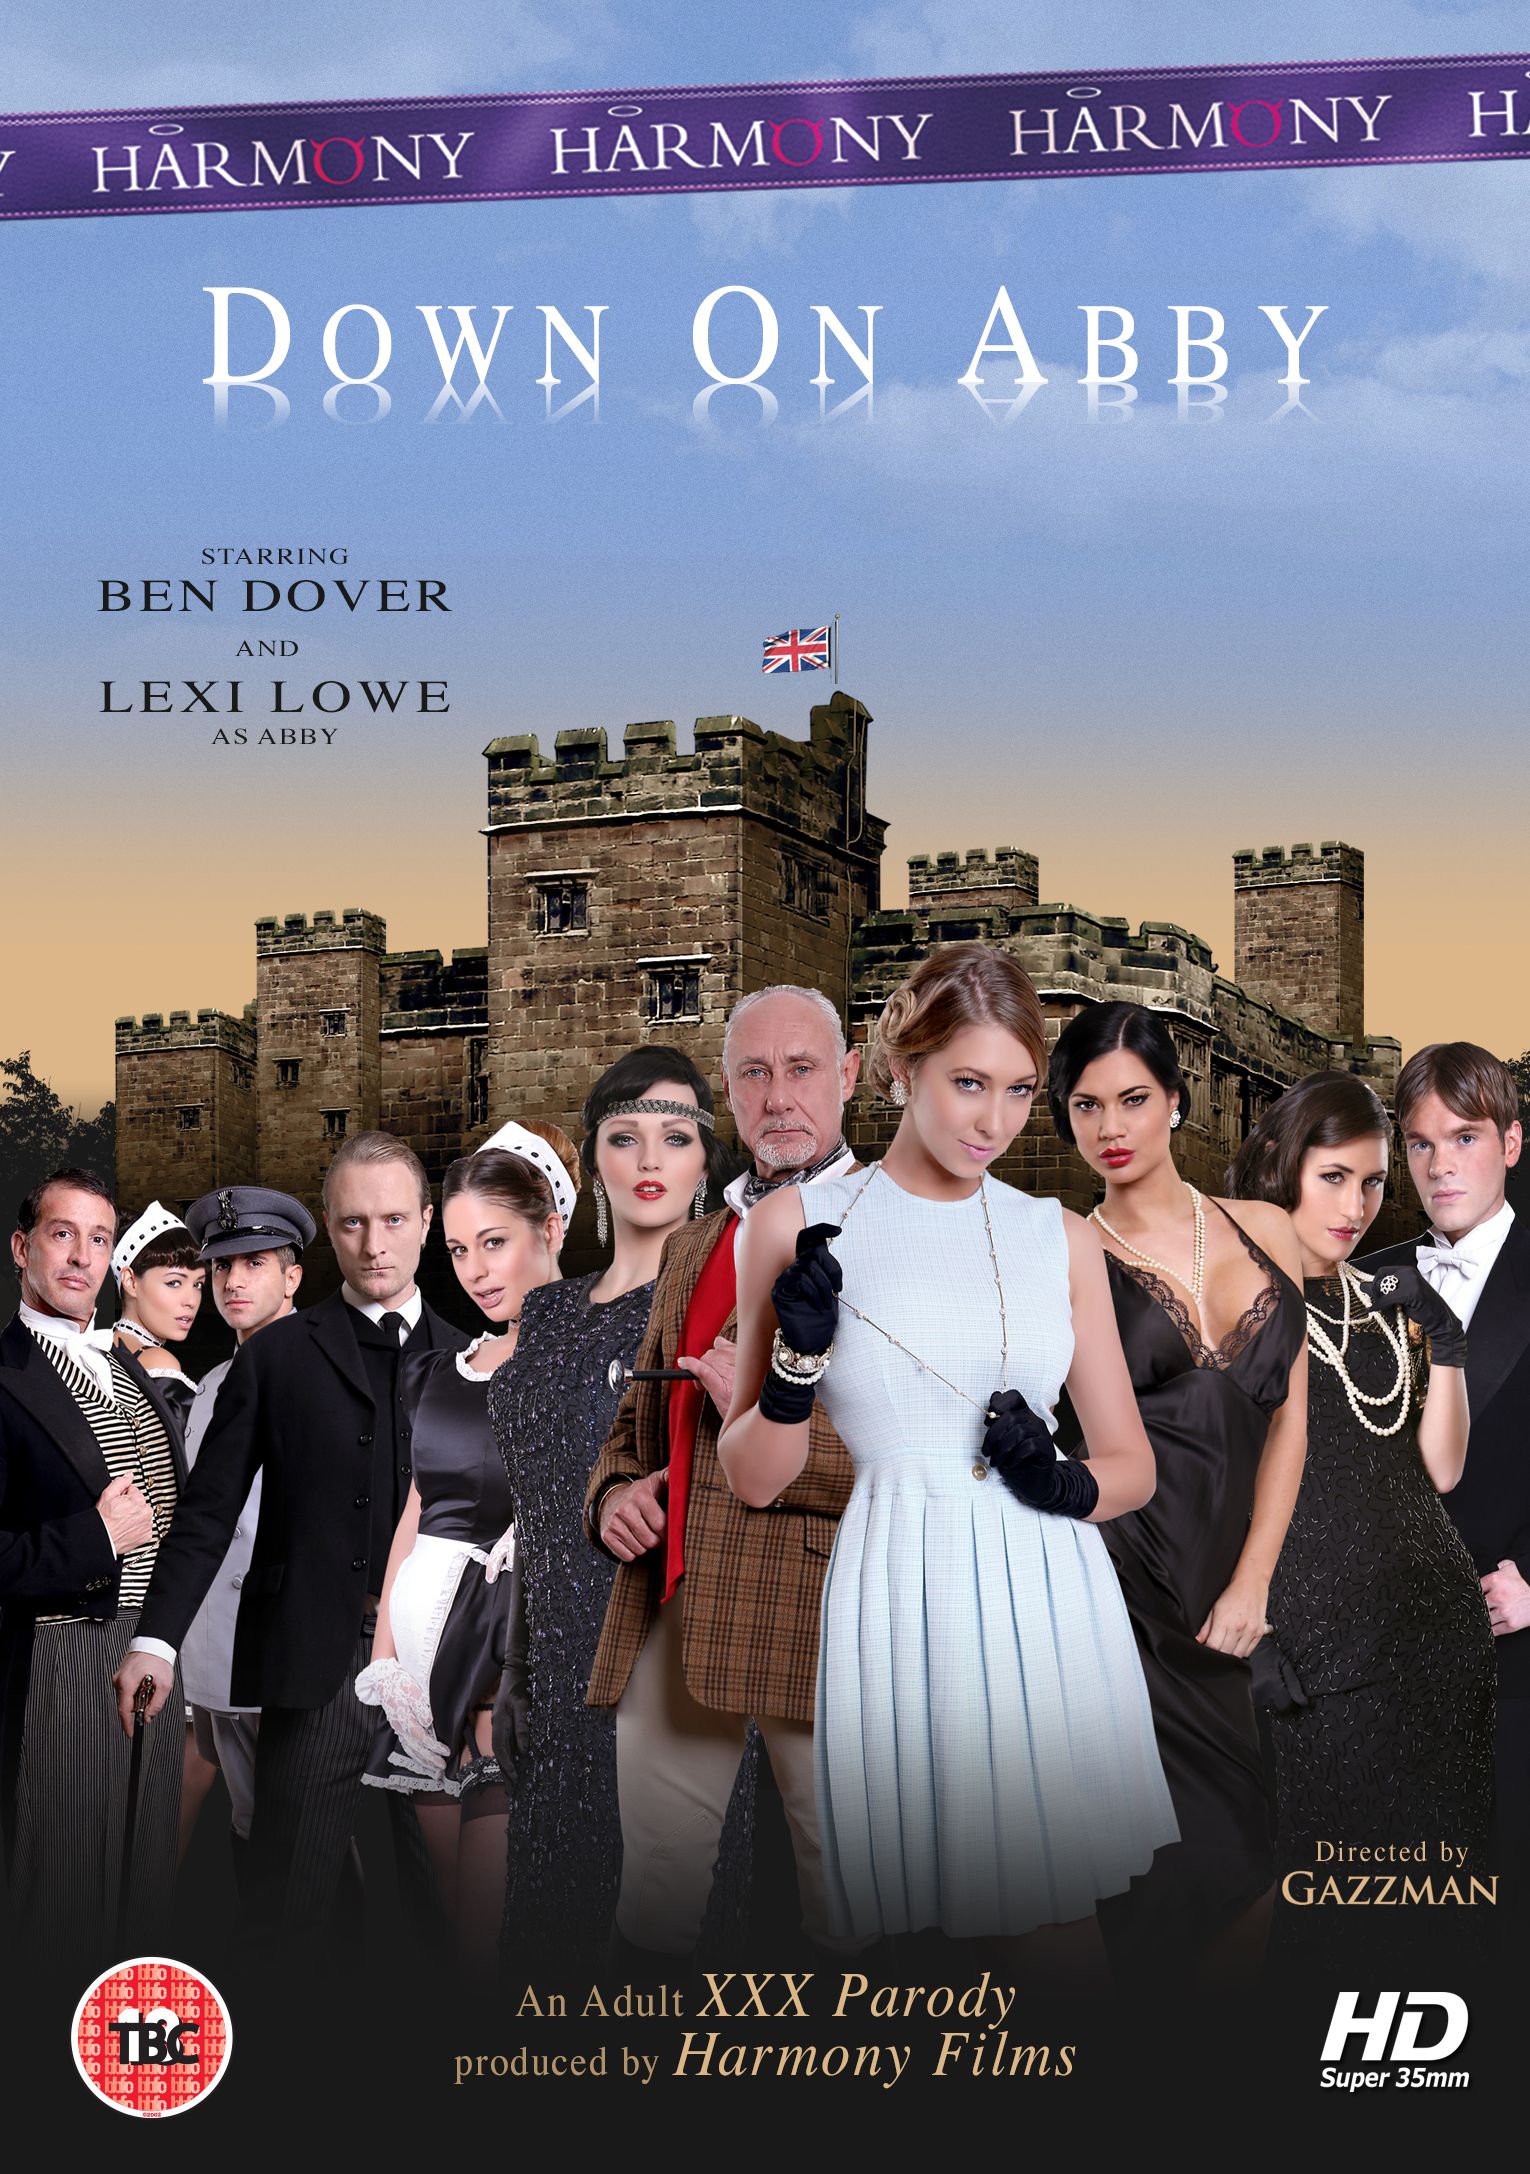 Down on Abby porn film gets \